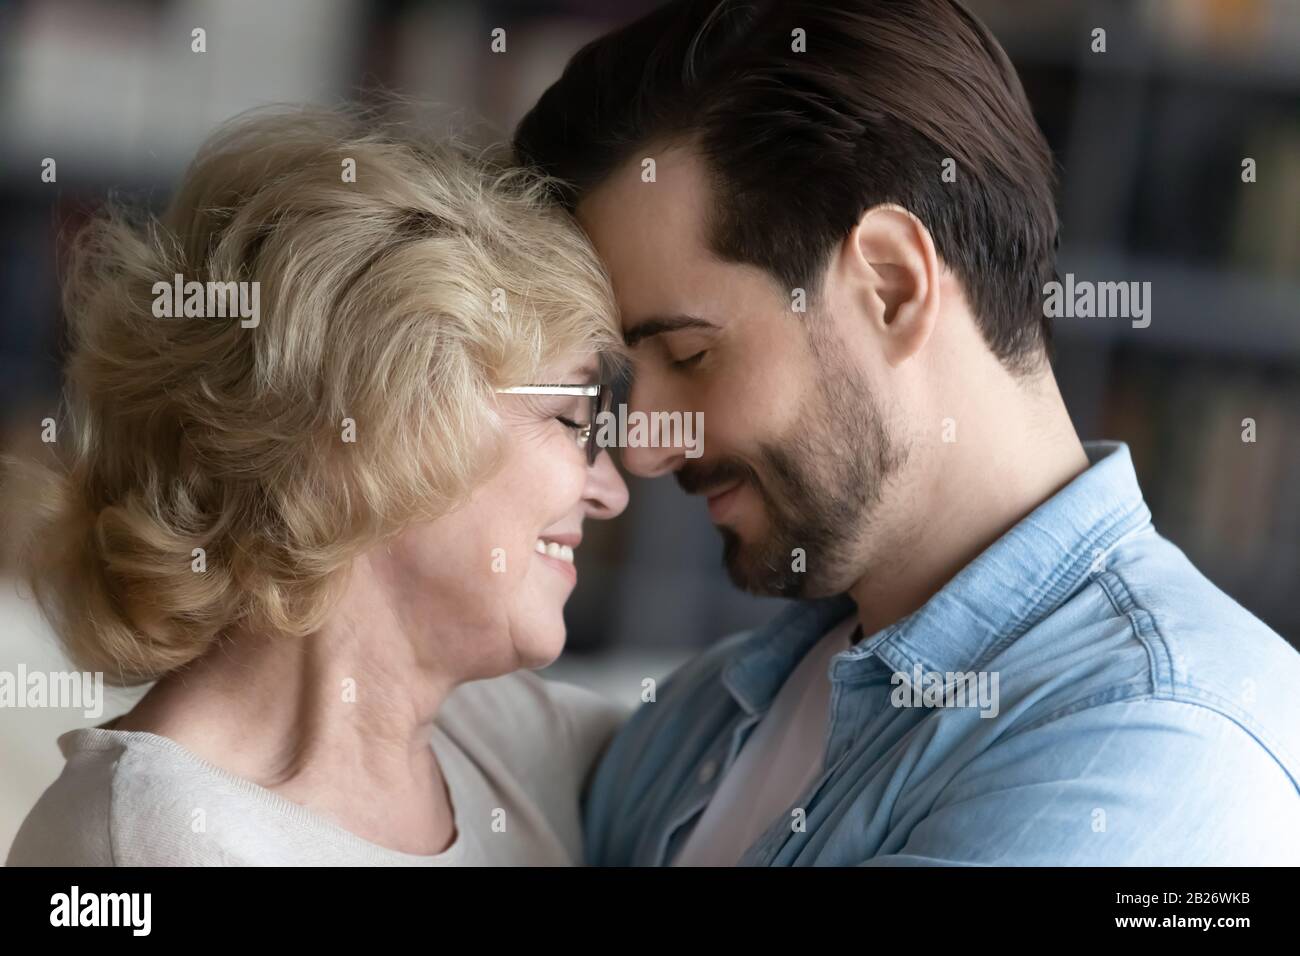 Happy mature mother and adult son enjoy close family moment Stock Photo